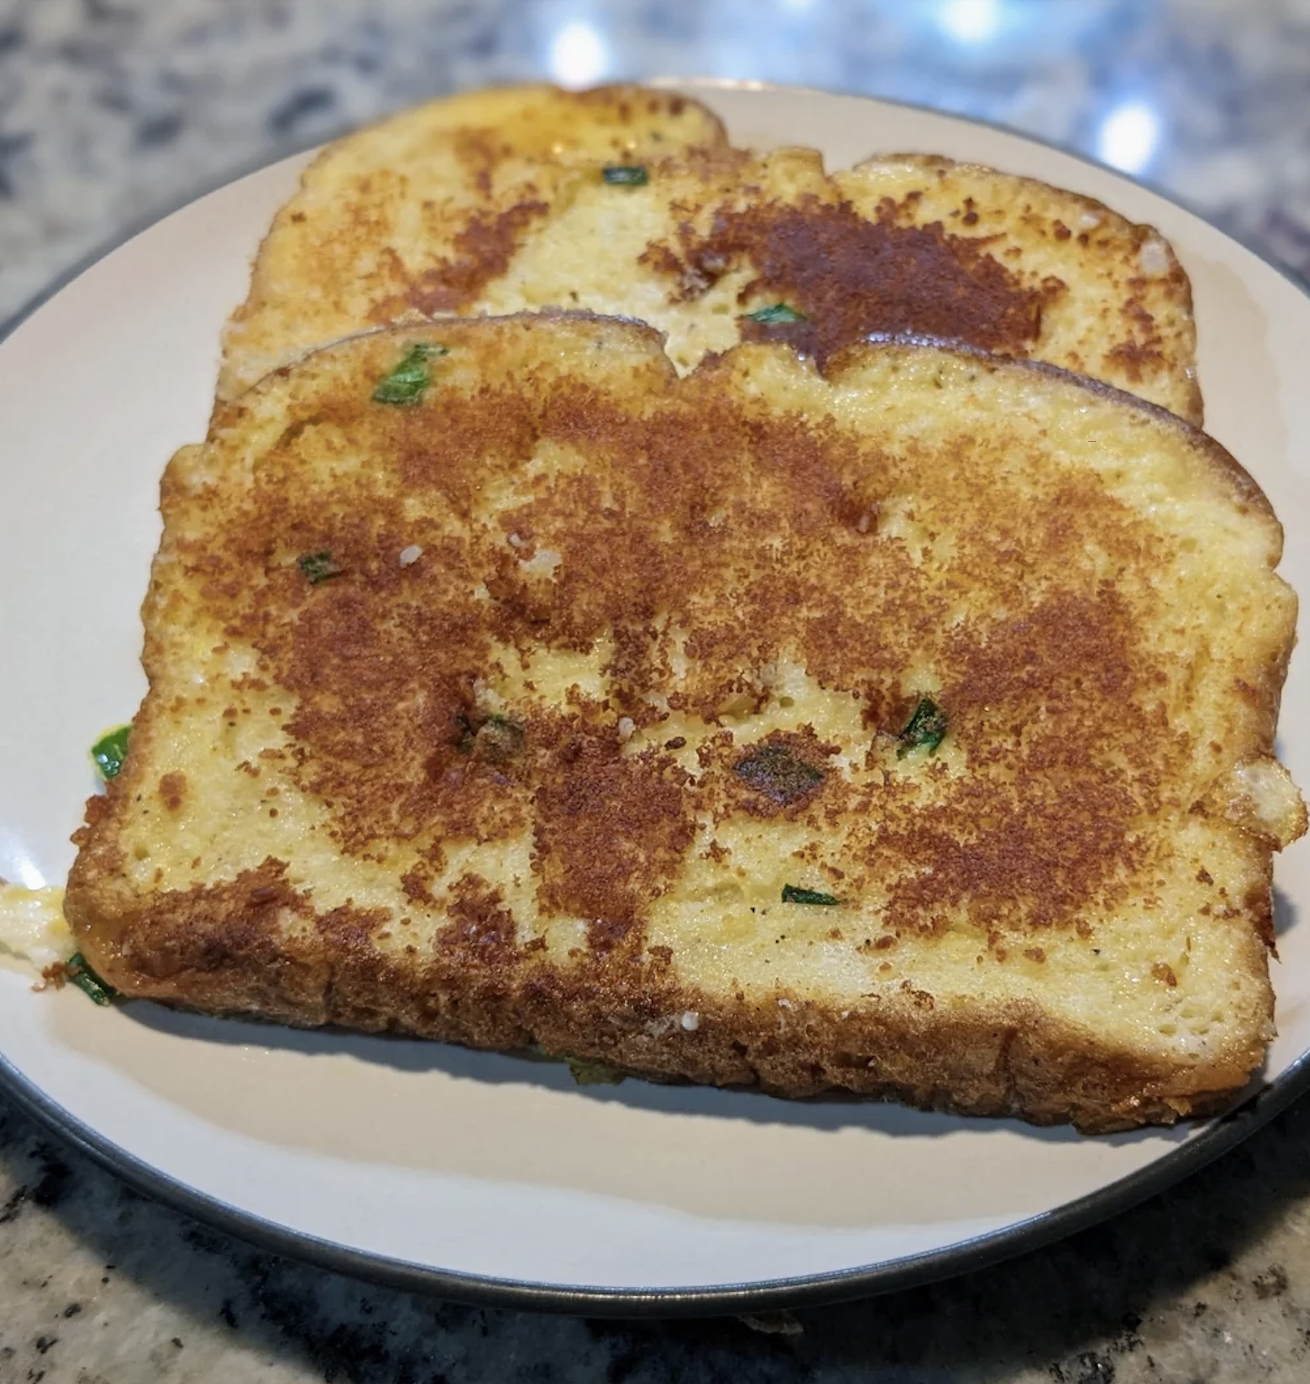 Two slices of French toast on a plate, garnished with herbs